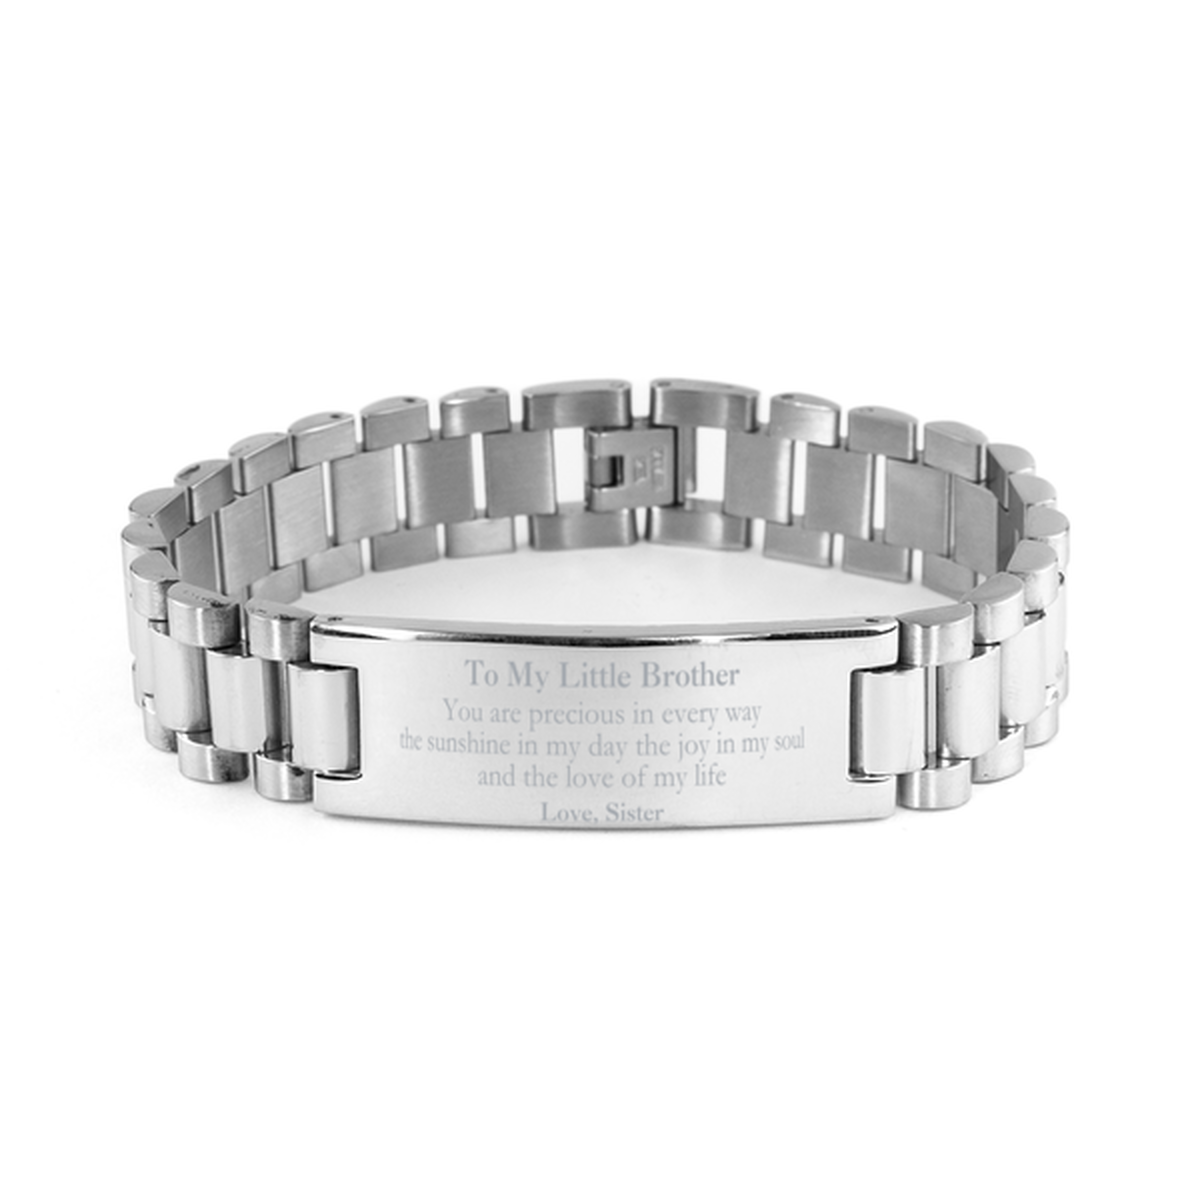 Graduation Gifts for Little Brother Ladder Stainless Steel Bracelet Present from Sister, Christmas Little Brother Birthday Gifts Little Brother You are precious in every way the sunshine in my day. Love, Sister